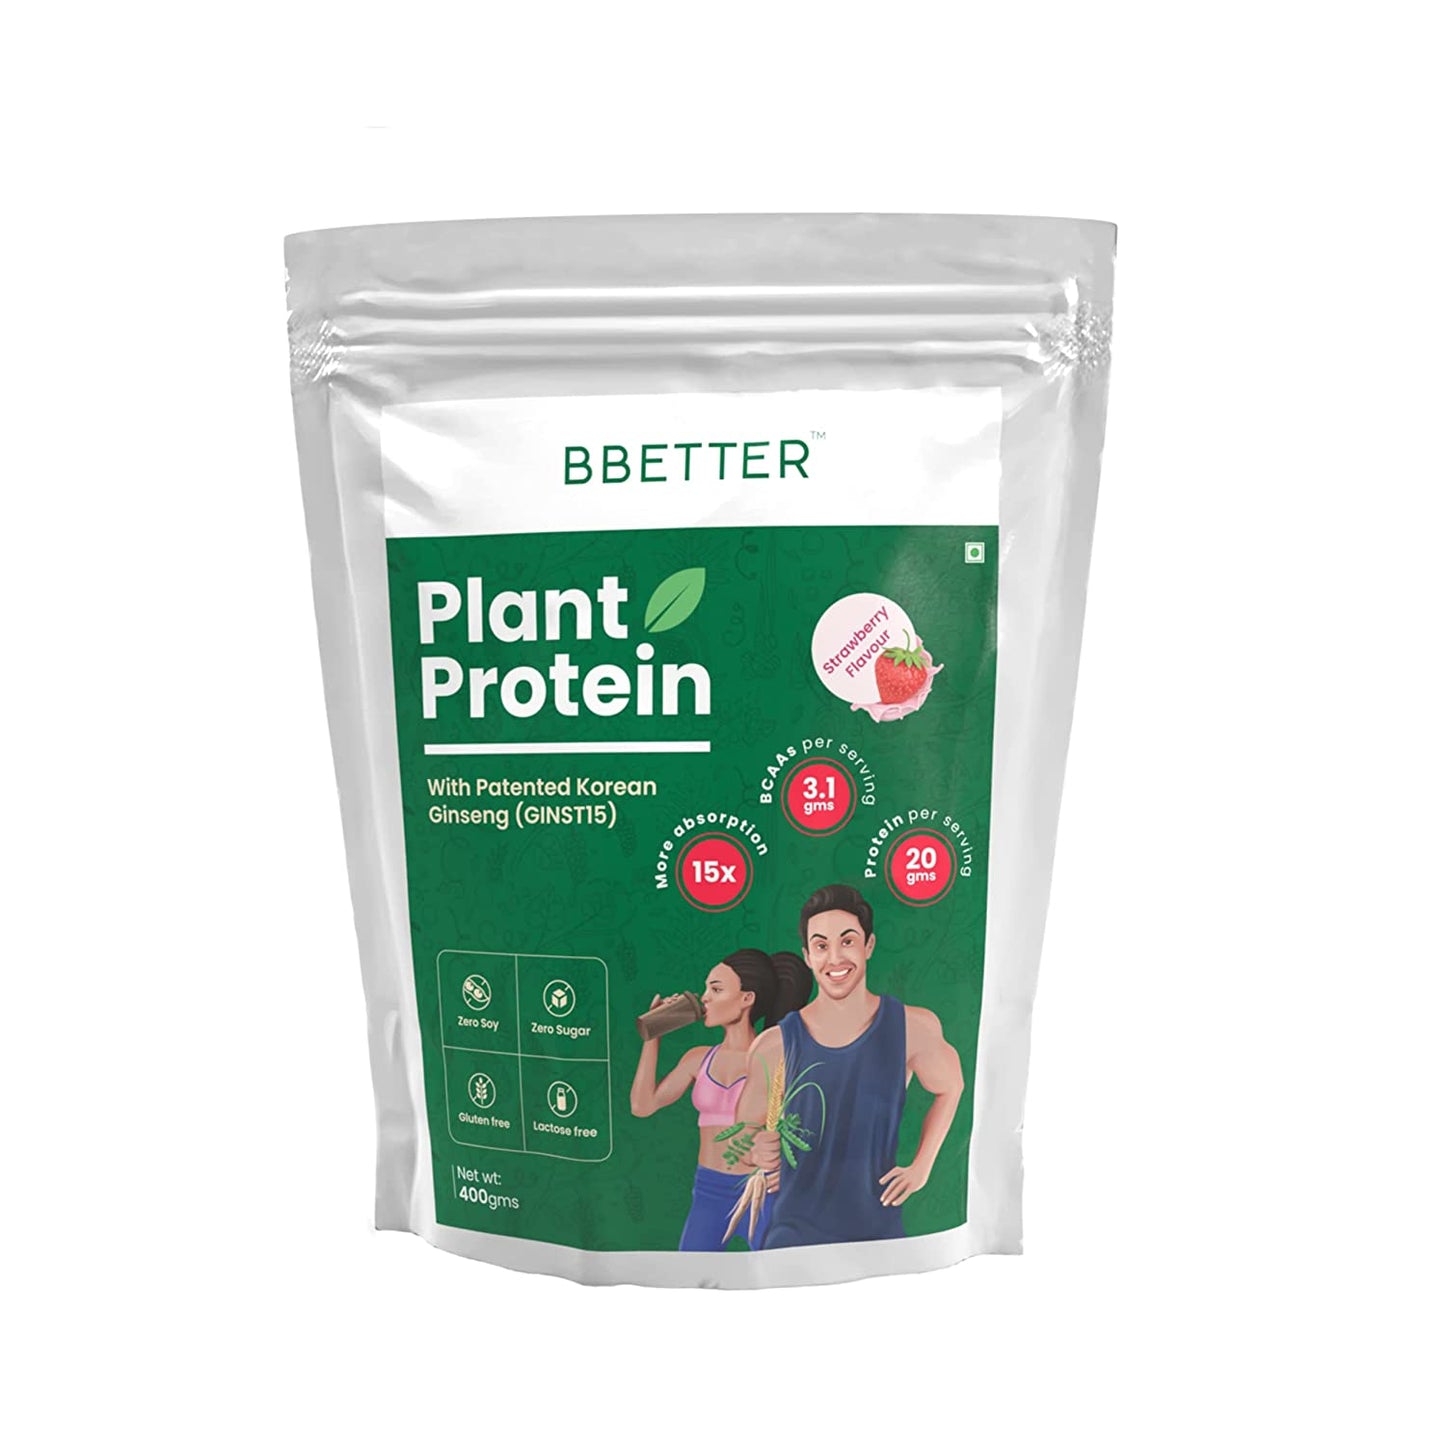 BBETTER Plant Protein for Men & Women | Enriched with Patented Korean Ginseng | 100% Vegan Protein Powder with NO ADDED SUGAR | Whey Protein Alternative with 20g Protein per serving | Strawberry Flavour